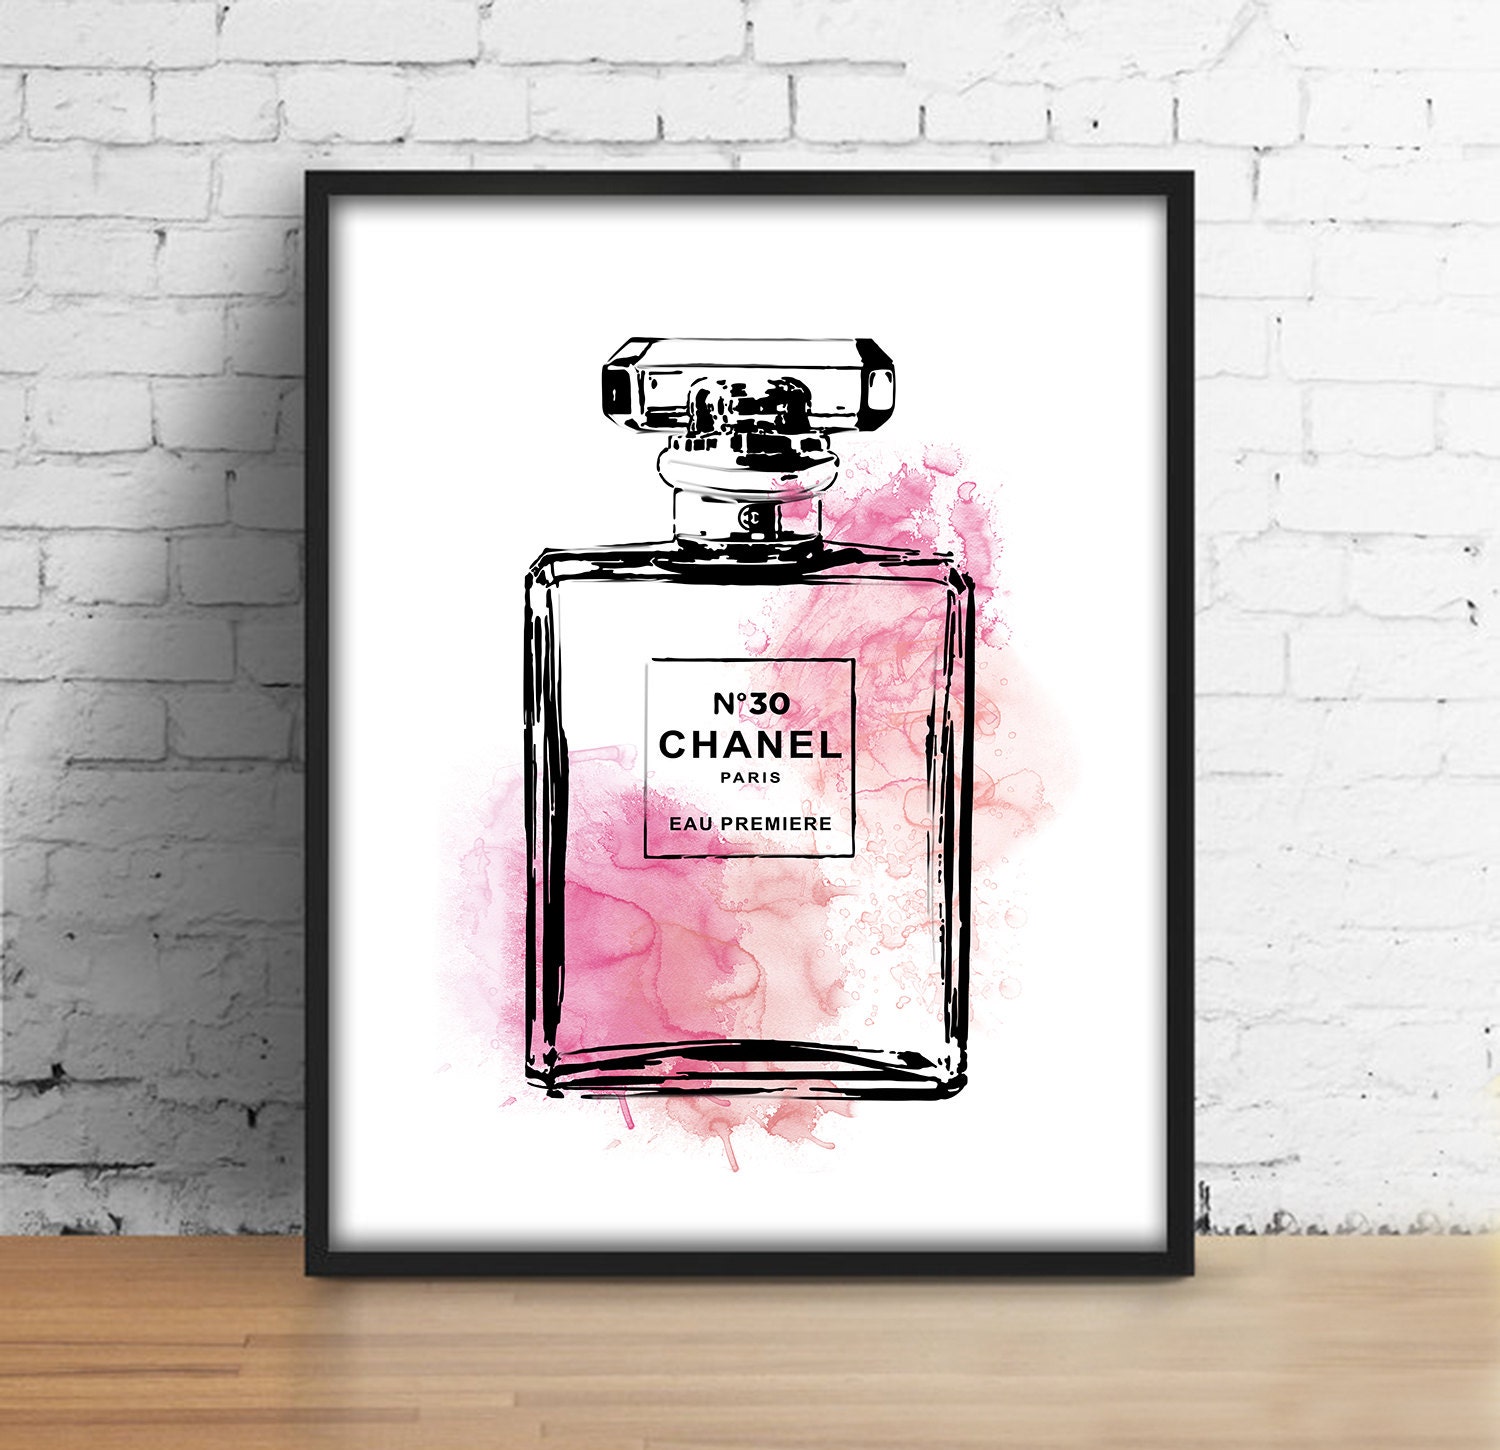 Coco Chanel bottle print Coco Chanel perfume 30 by BestBuyPrints